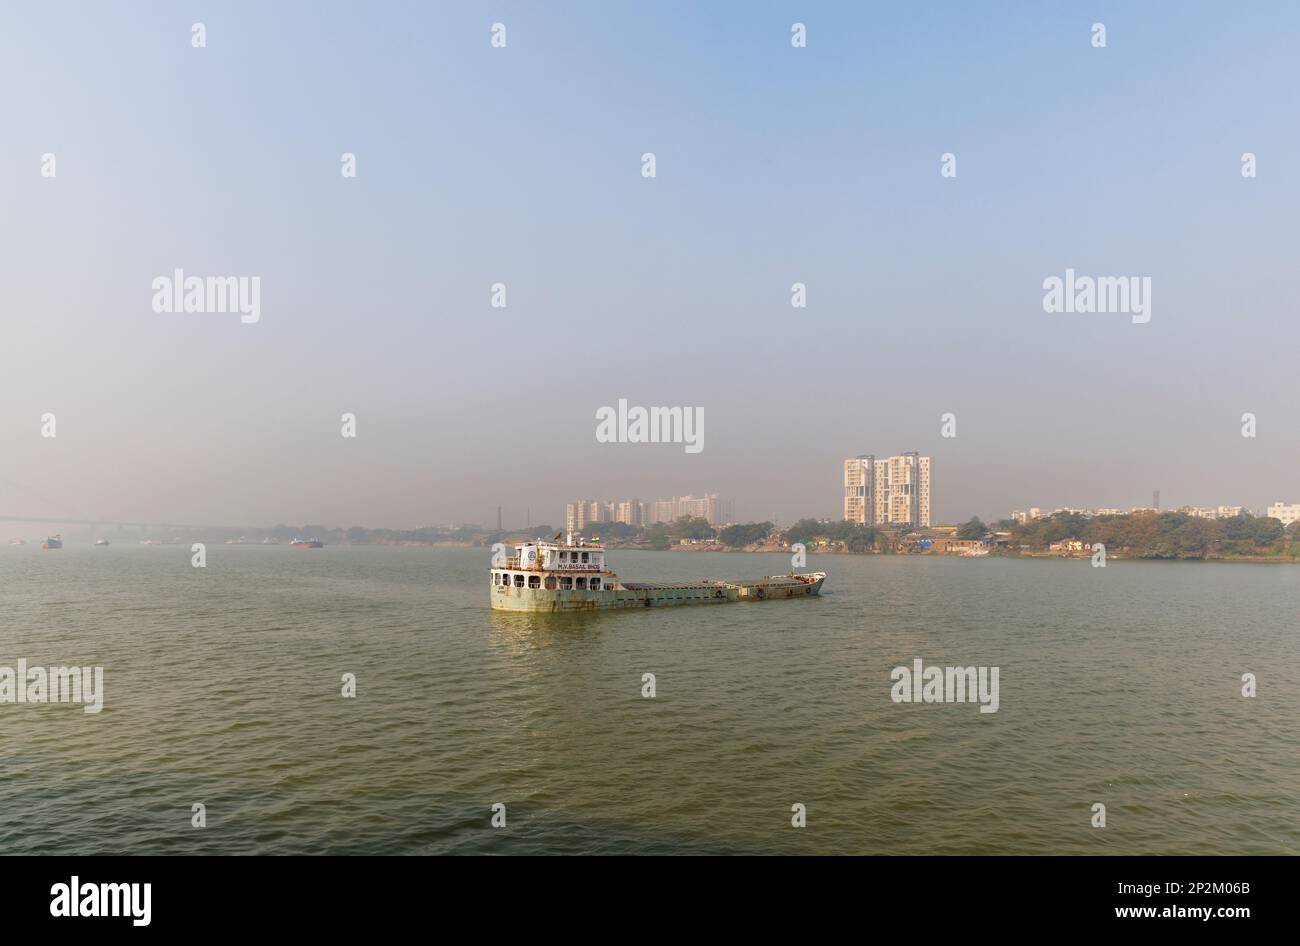 A boat moored and early morning smoggy atmosphere over the Hooghly River at Kolkata (Calcutta), capital city of West Bengal, India Stock Photo